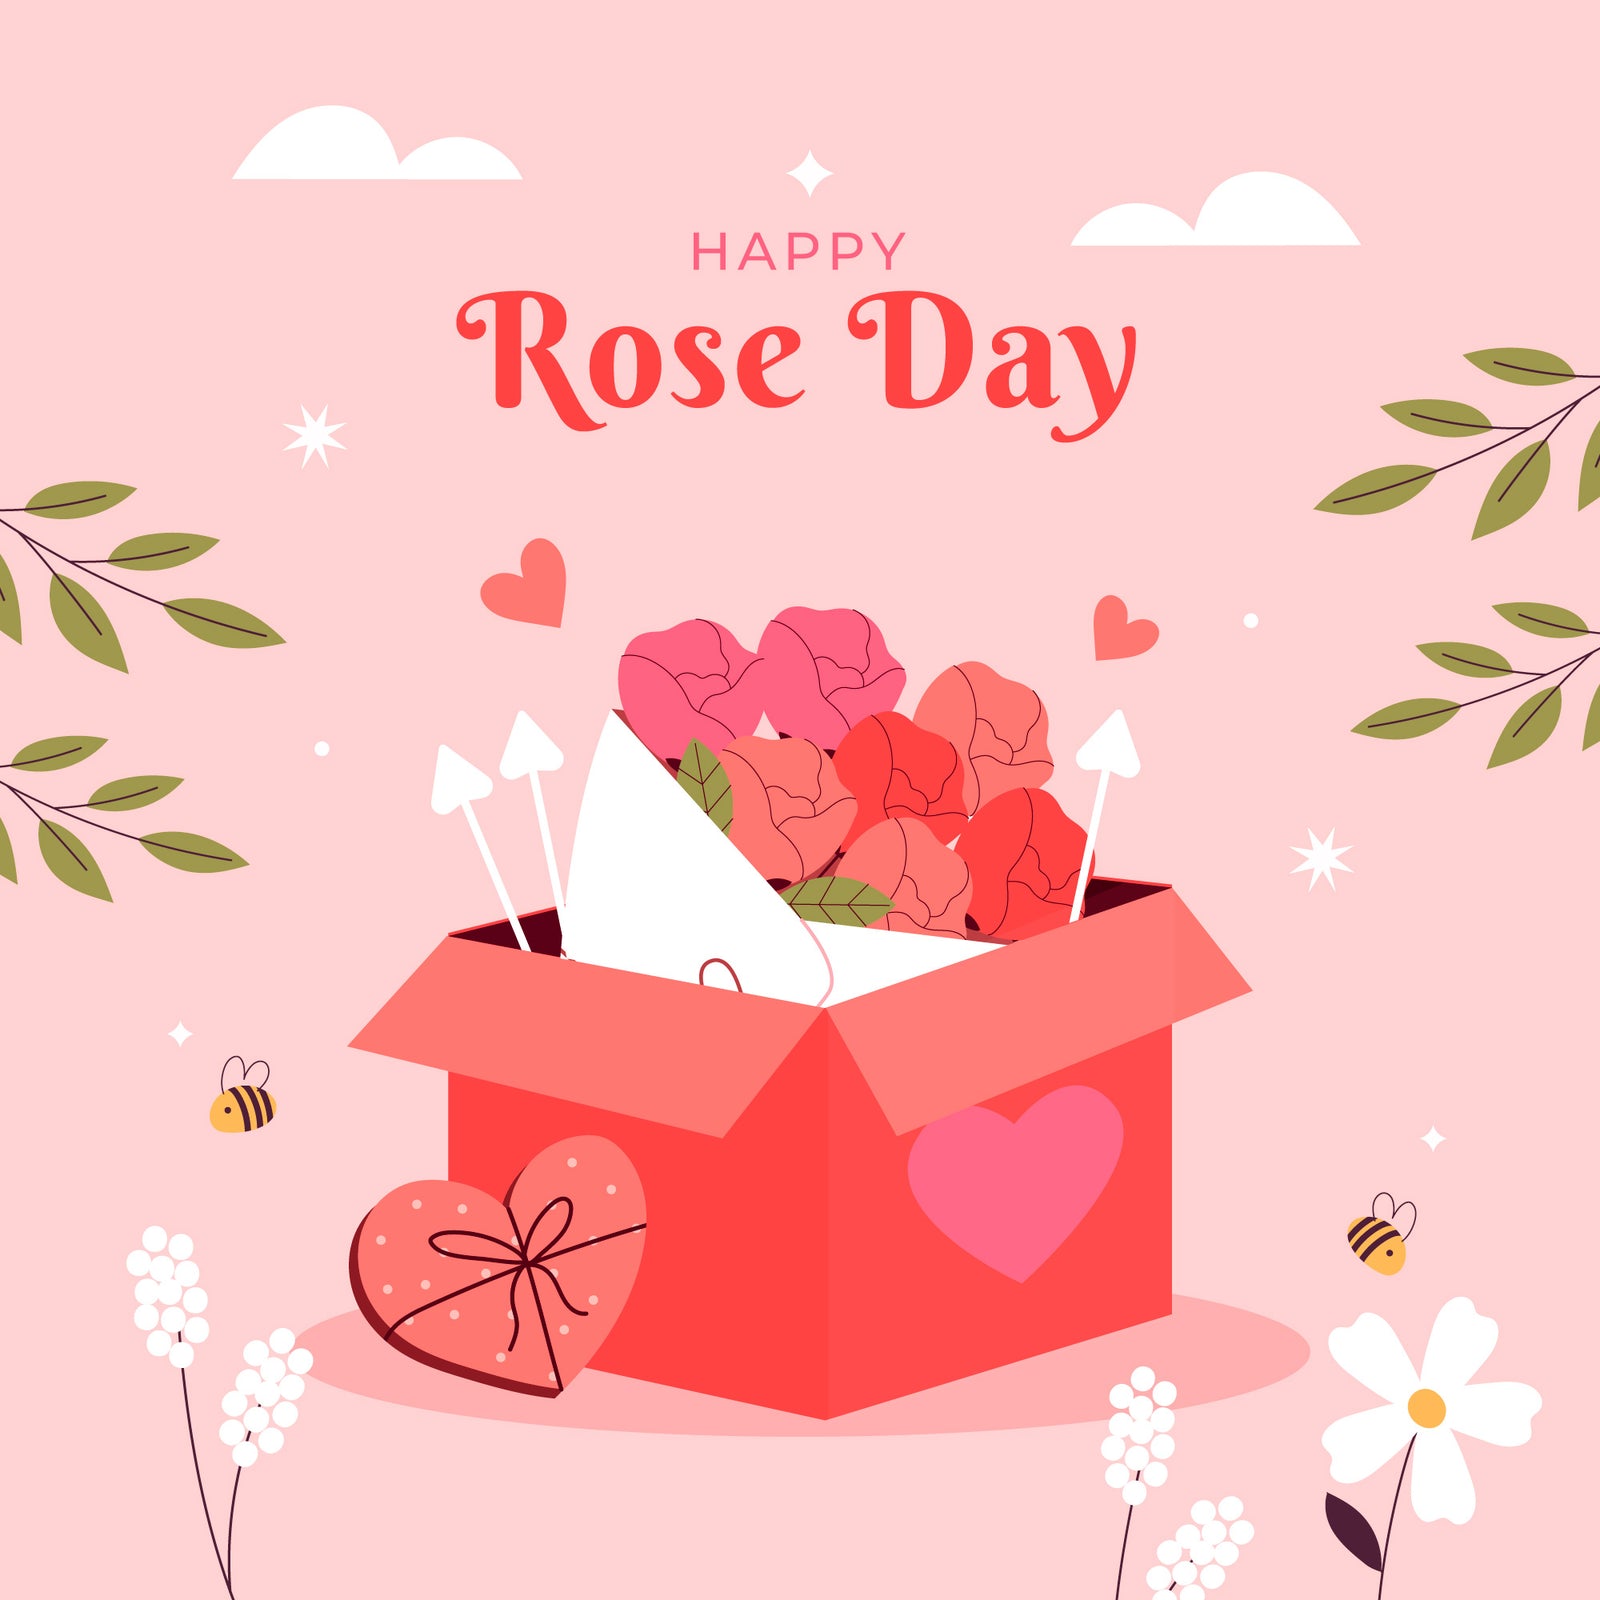 Rose Day: Quotes and Greetings to Send to Your Loved One